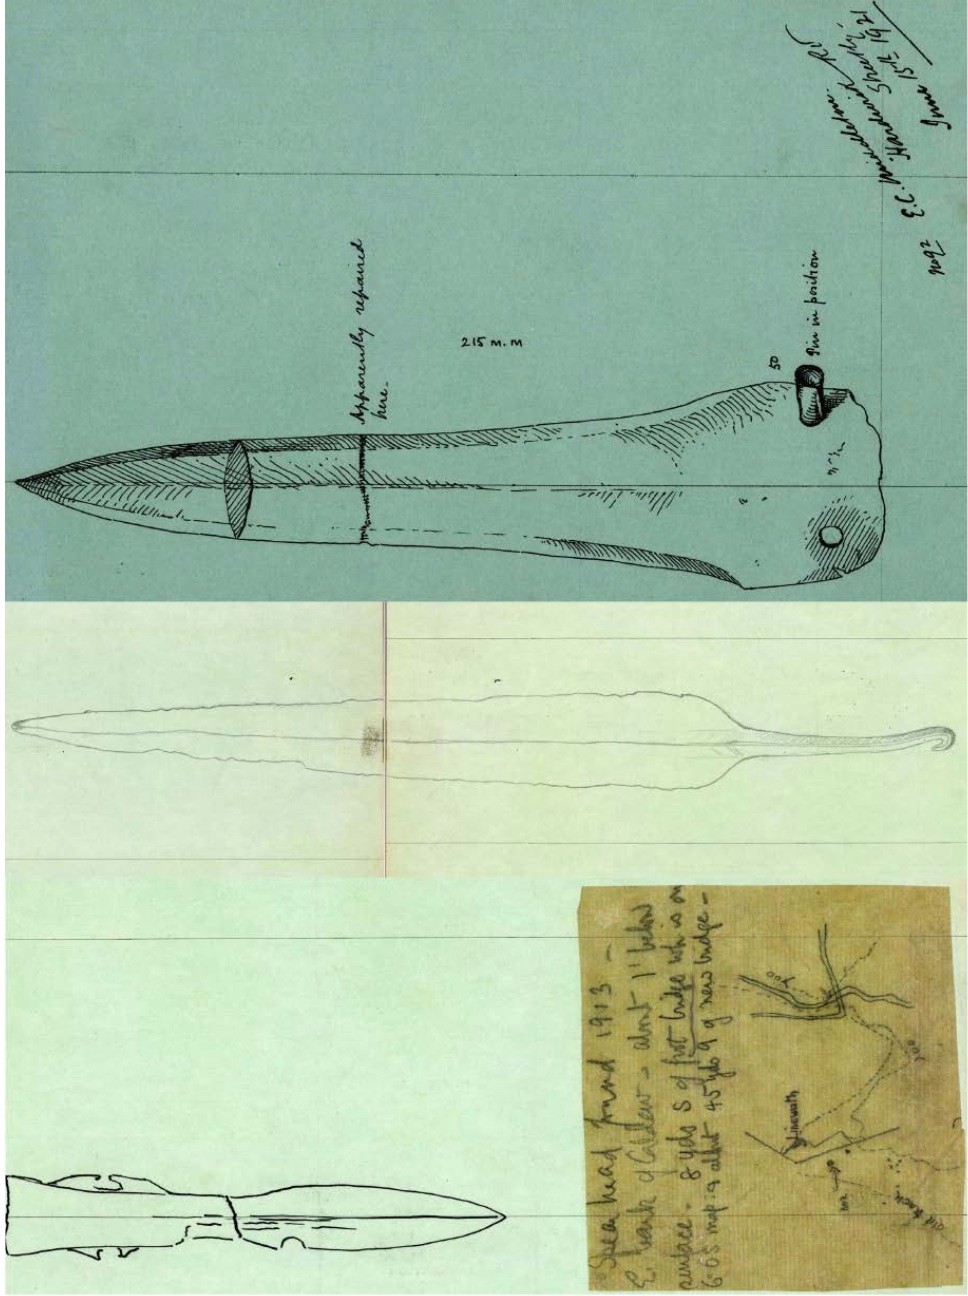 Figure 4: Variations in Index card illustrations from sketches to measured typographic drawings 